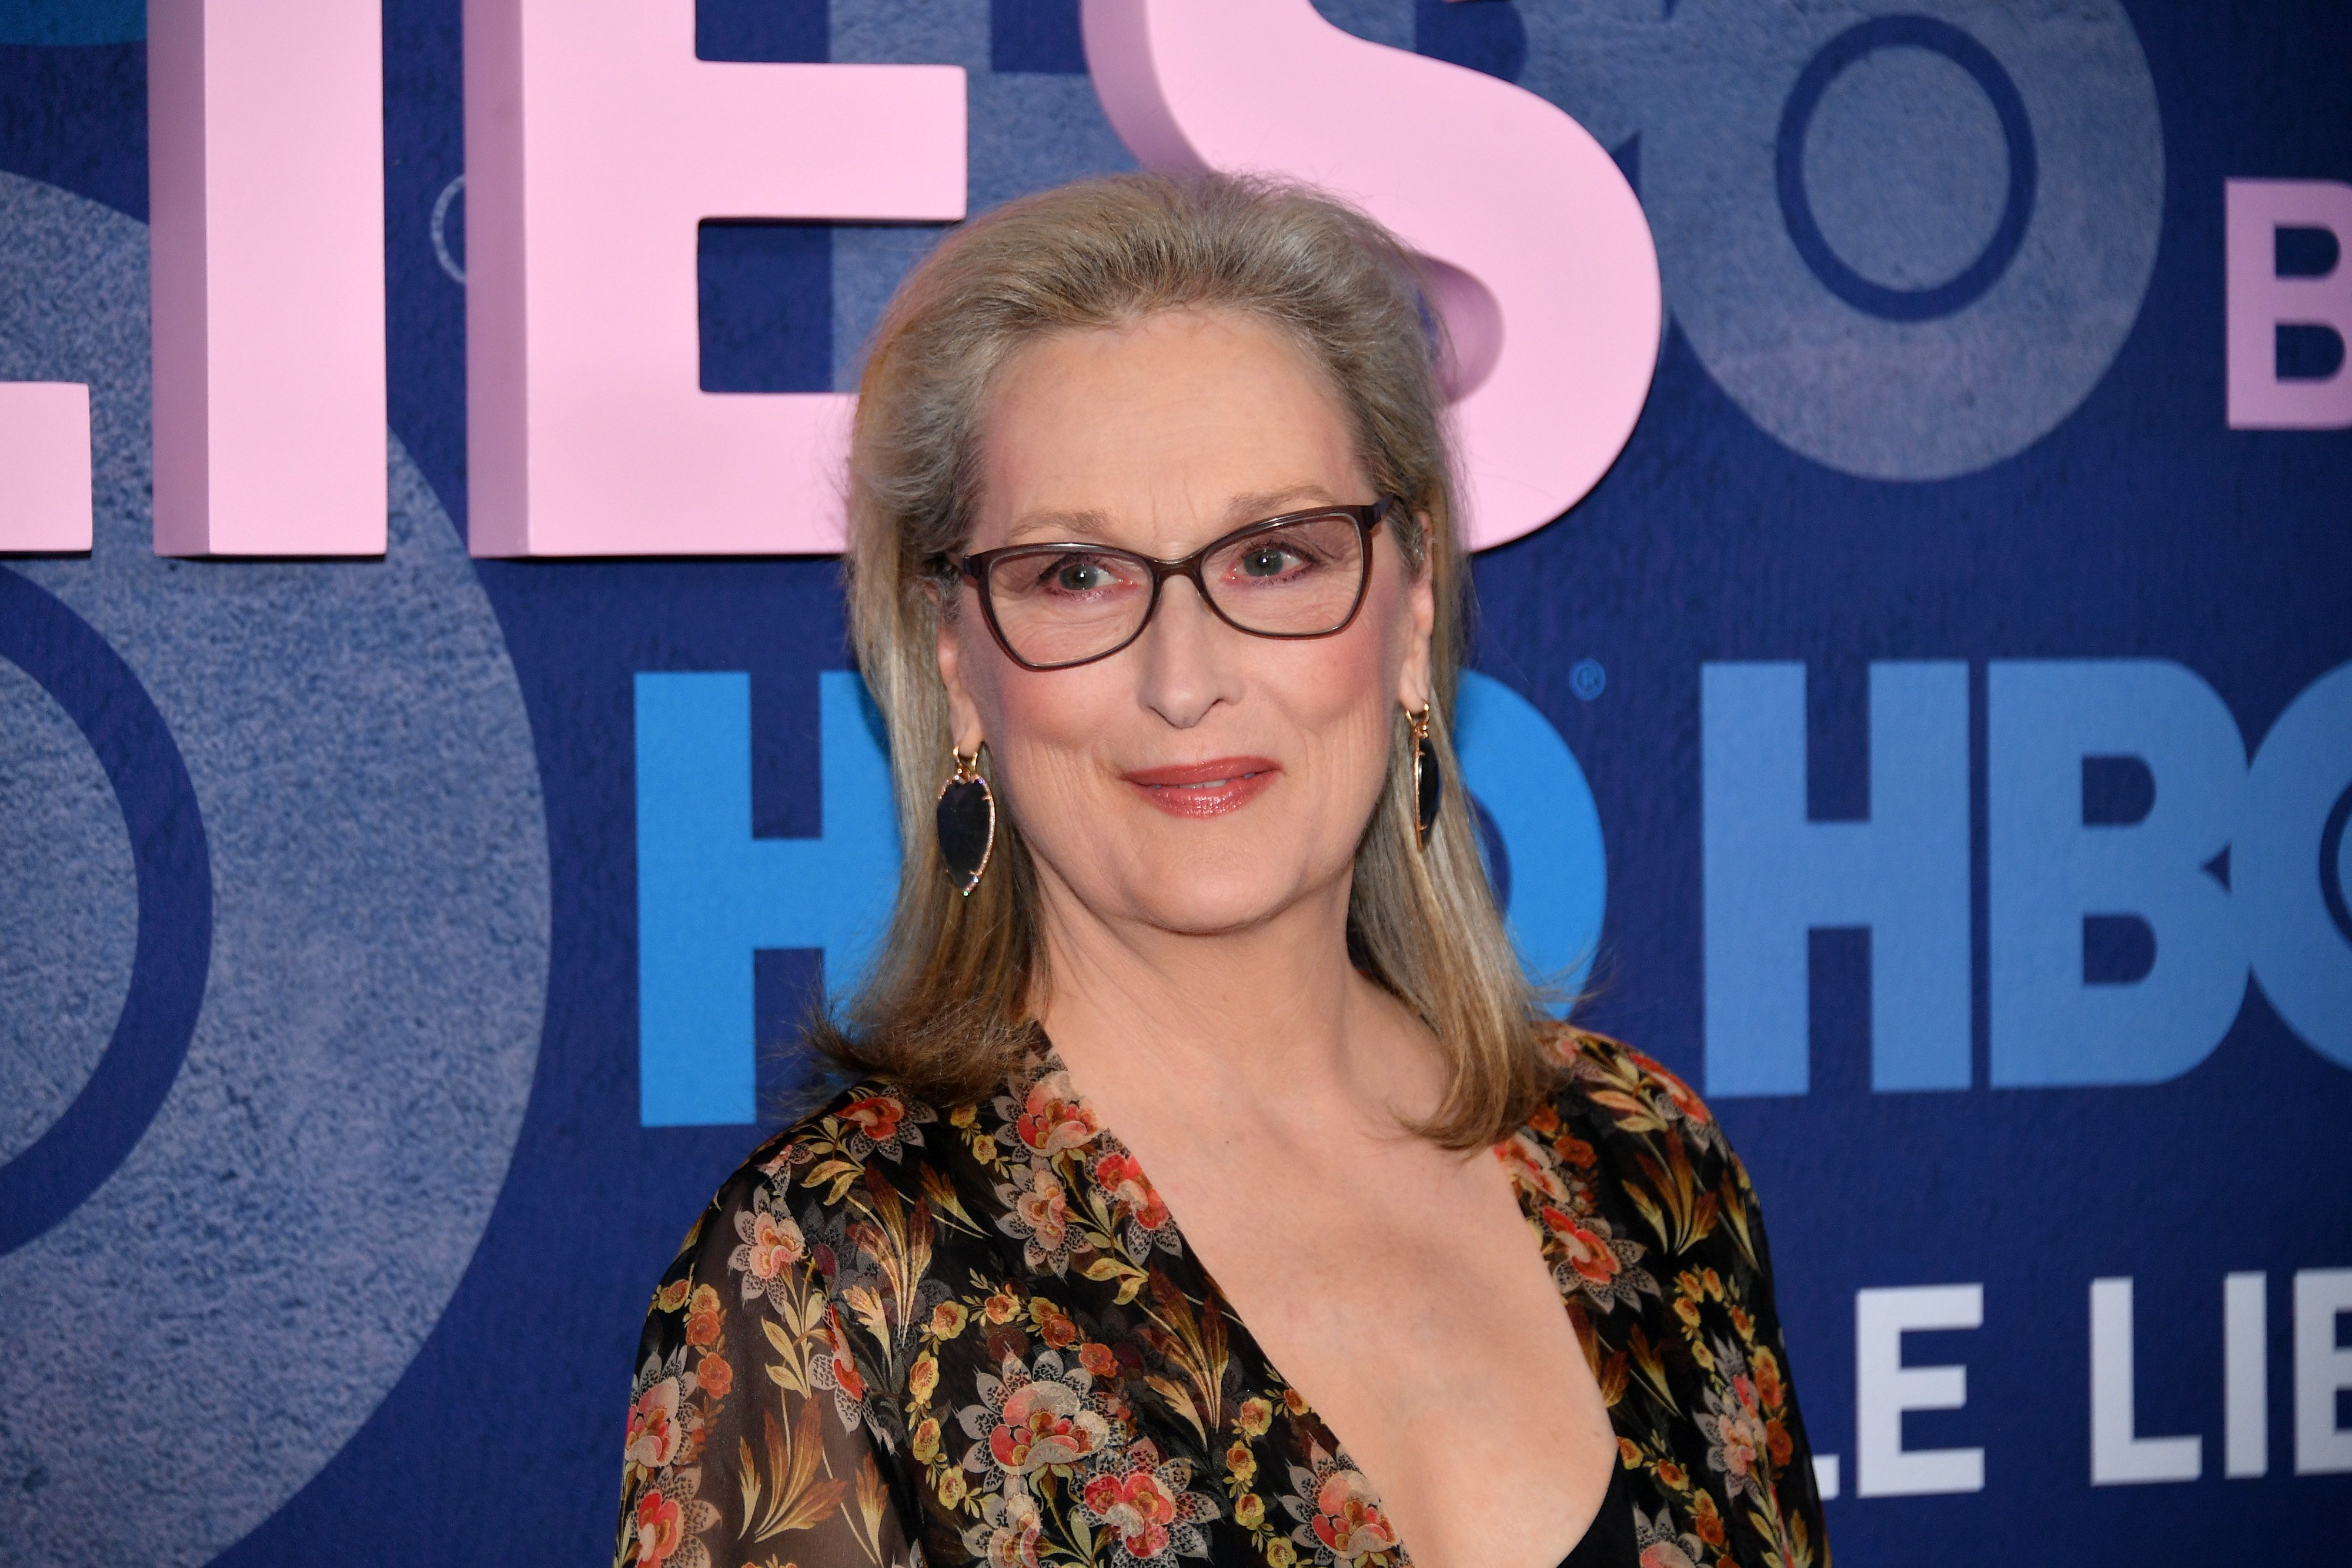 Meryl Streep Looks Almost Unrecognizable As She Debuts A New Hair Color For Her Latest Role